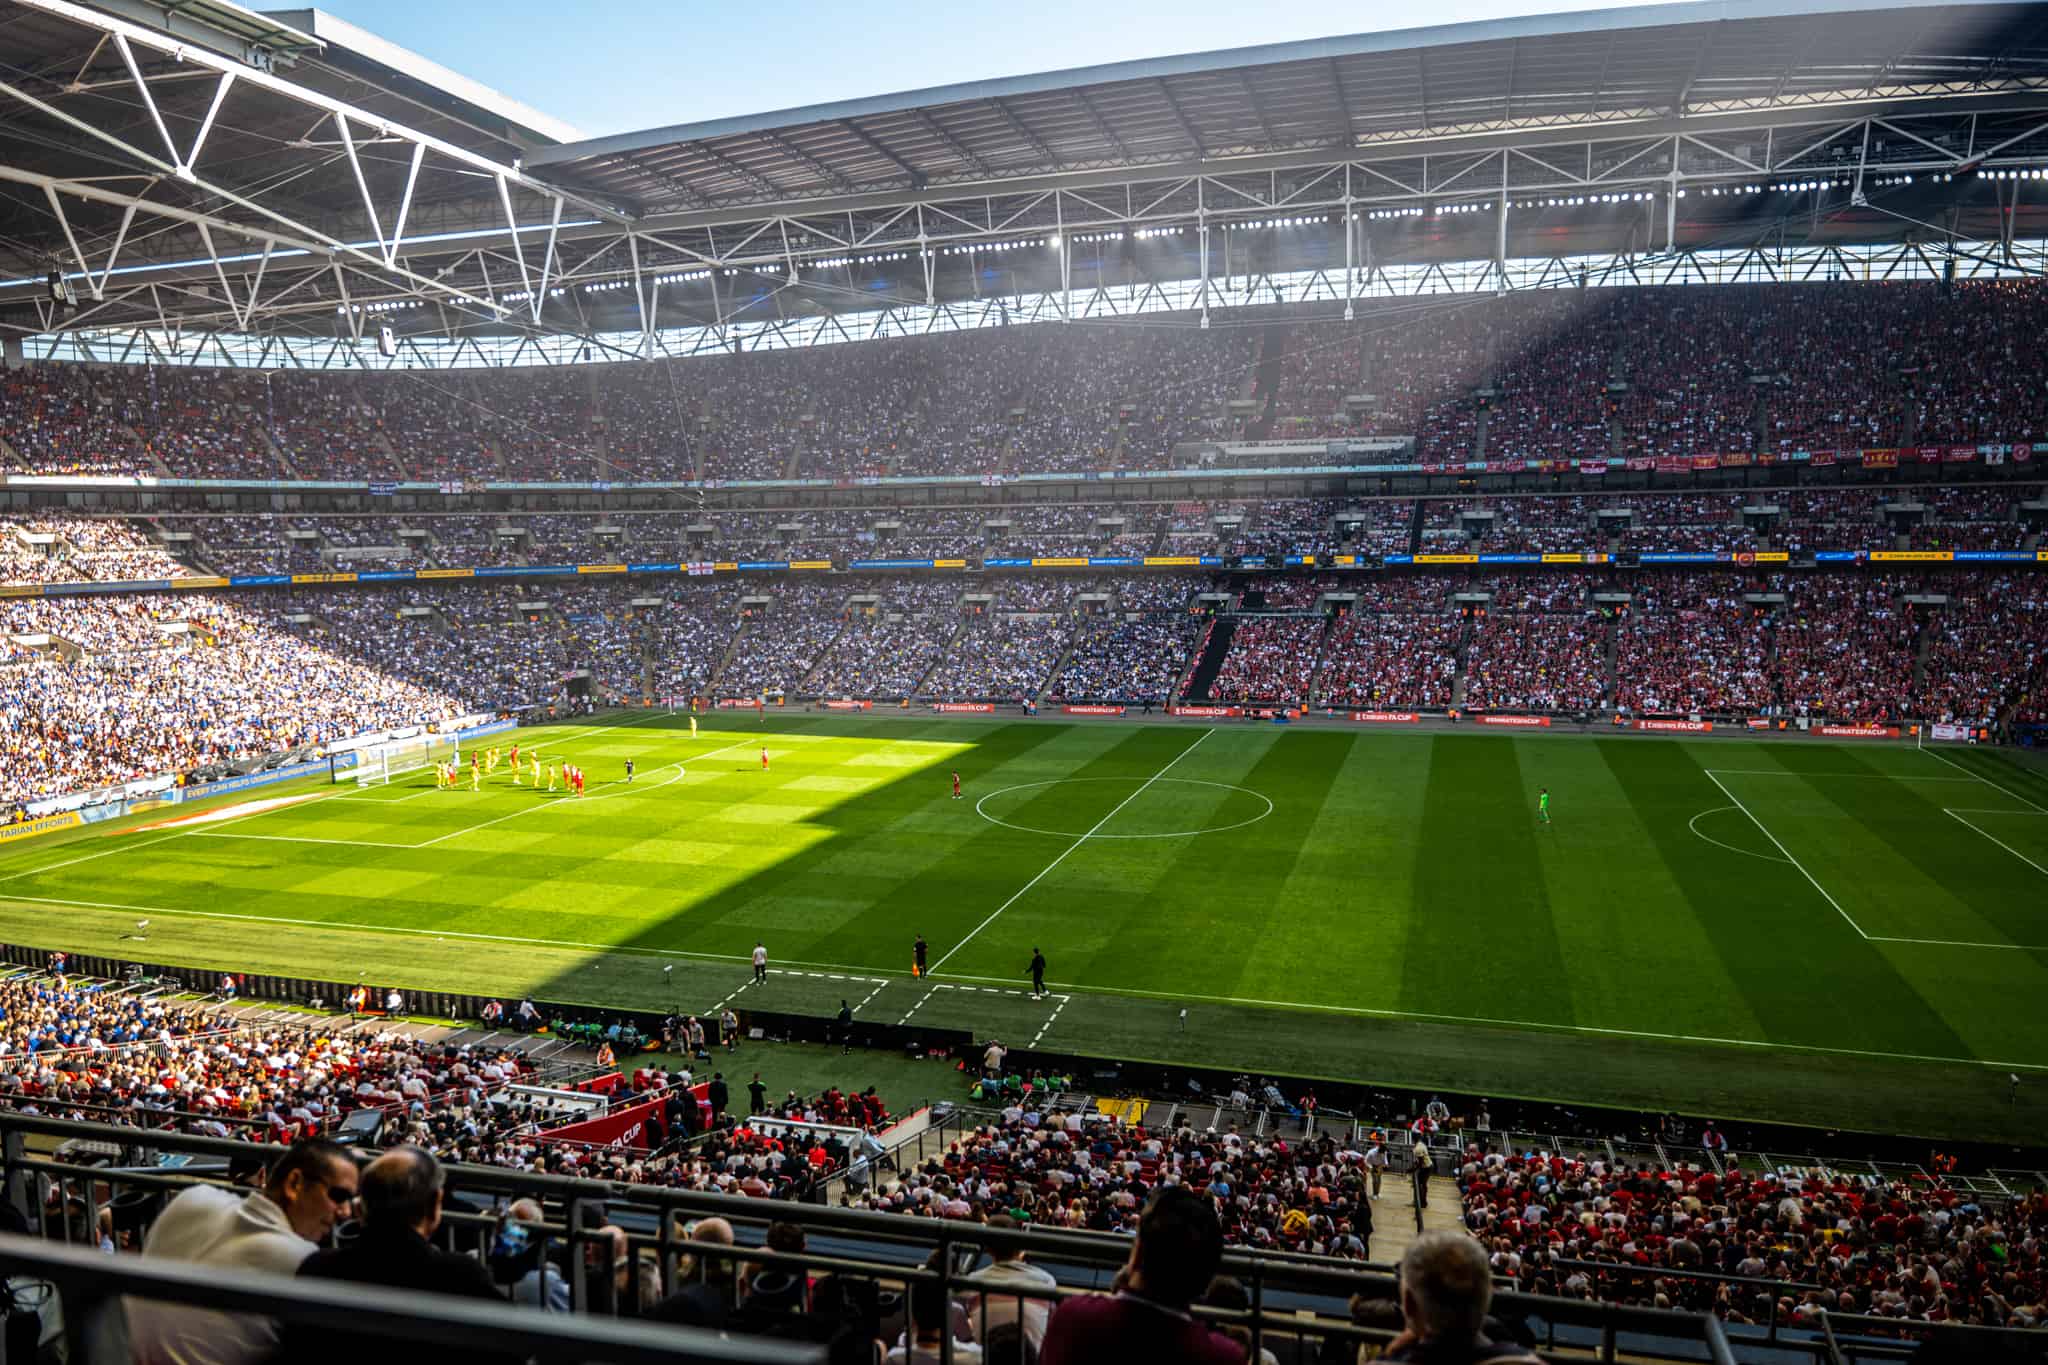 FA Cup Final – Manchester United v Manchester City